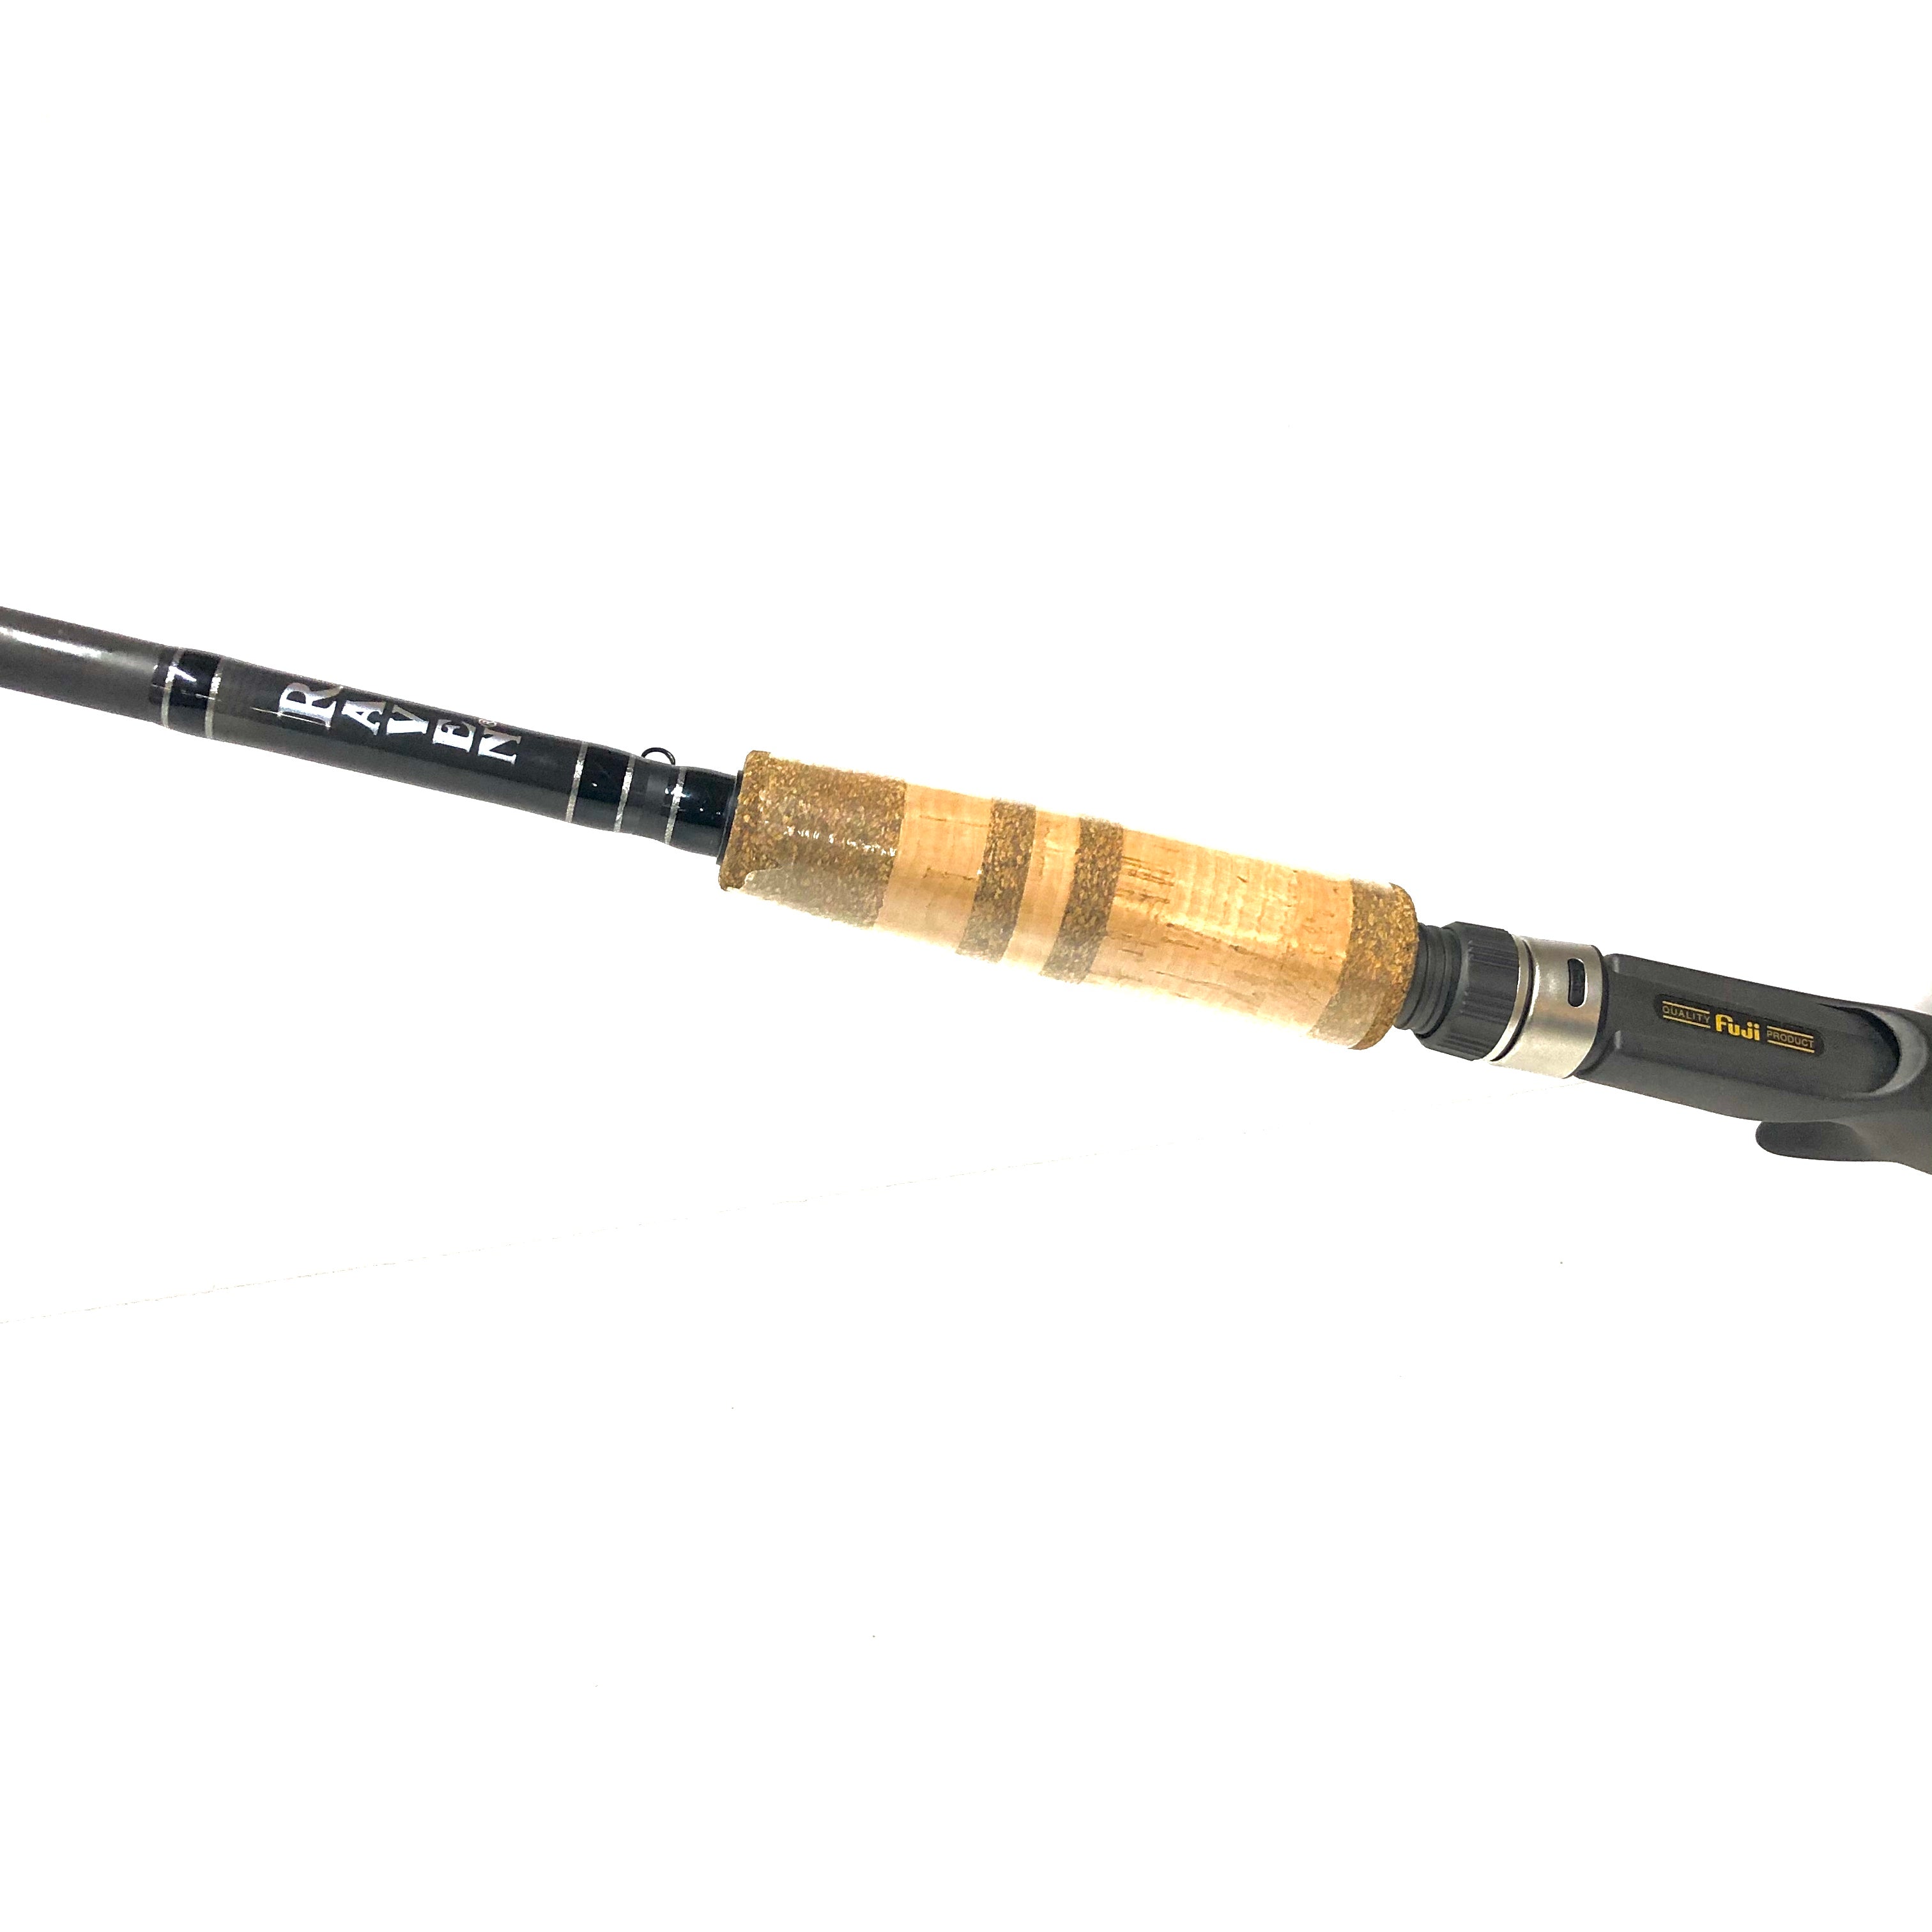 Raven RPX Spiral Baitcast Float Rod – Natural Sports - The Fishing Store